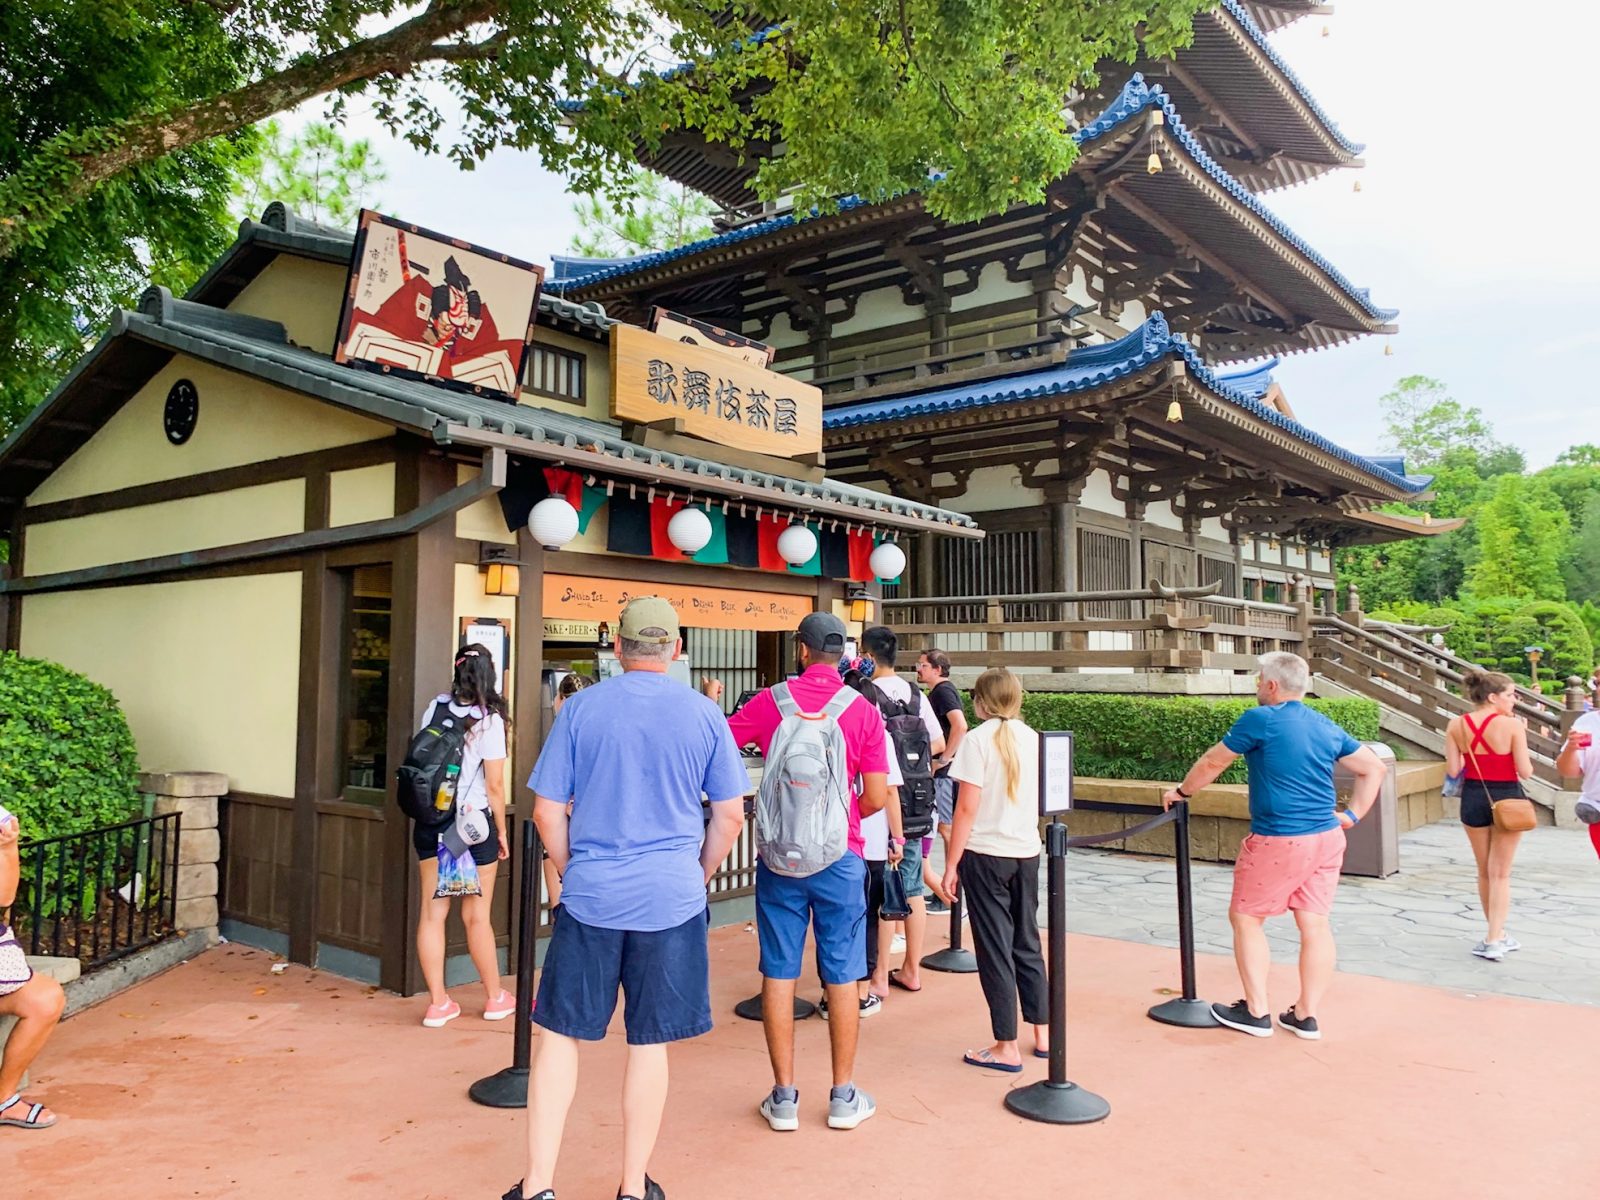 People in line at Kabuki Cafe in Epcot Japan